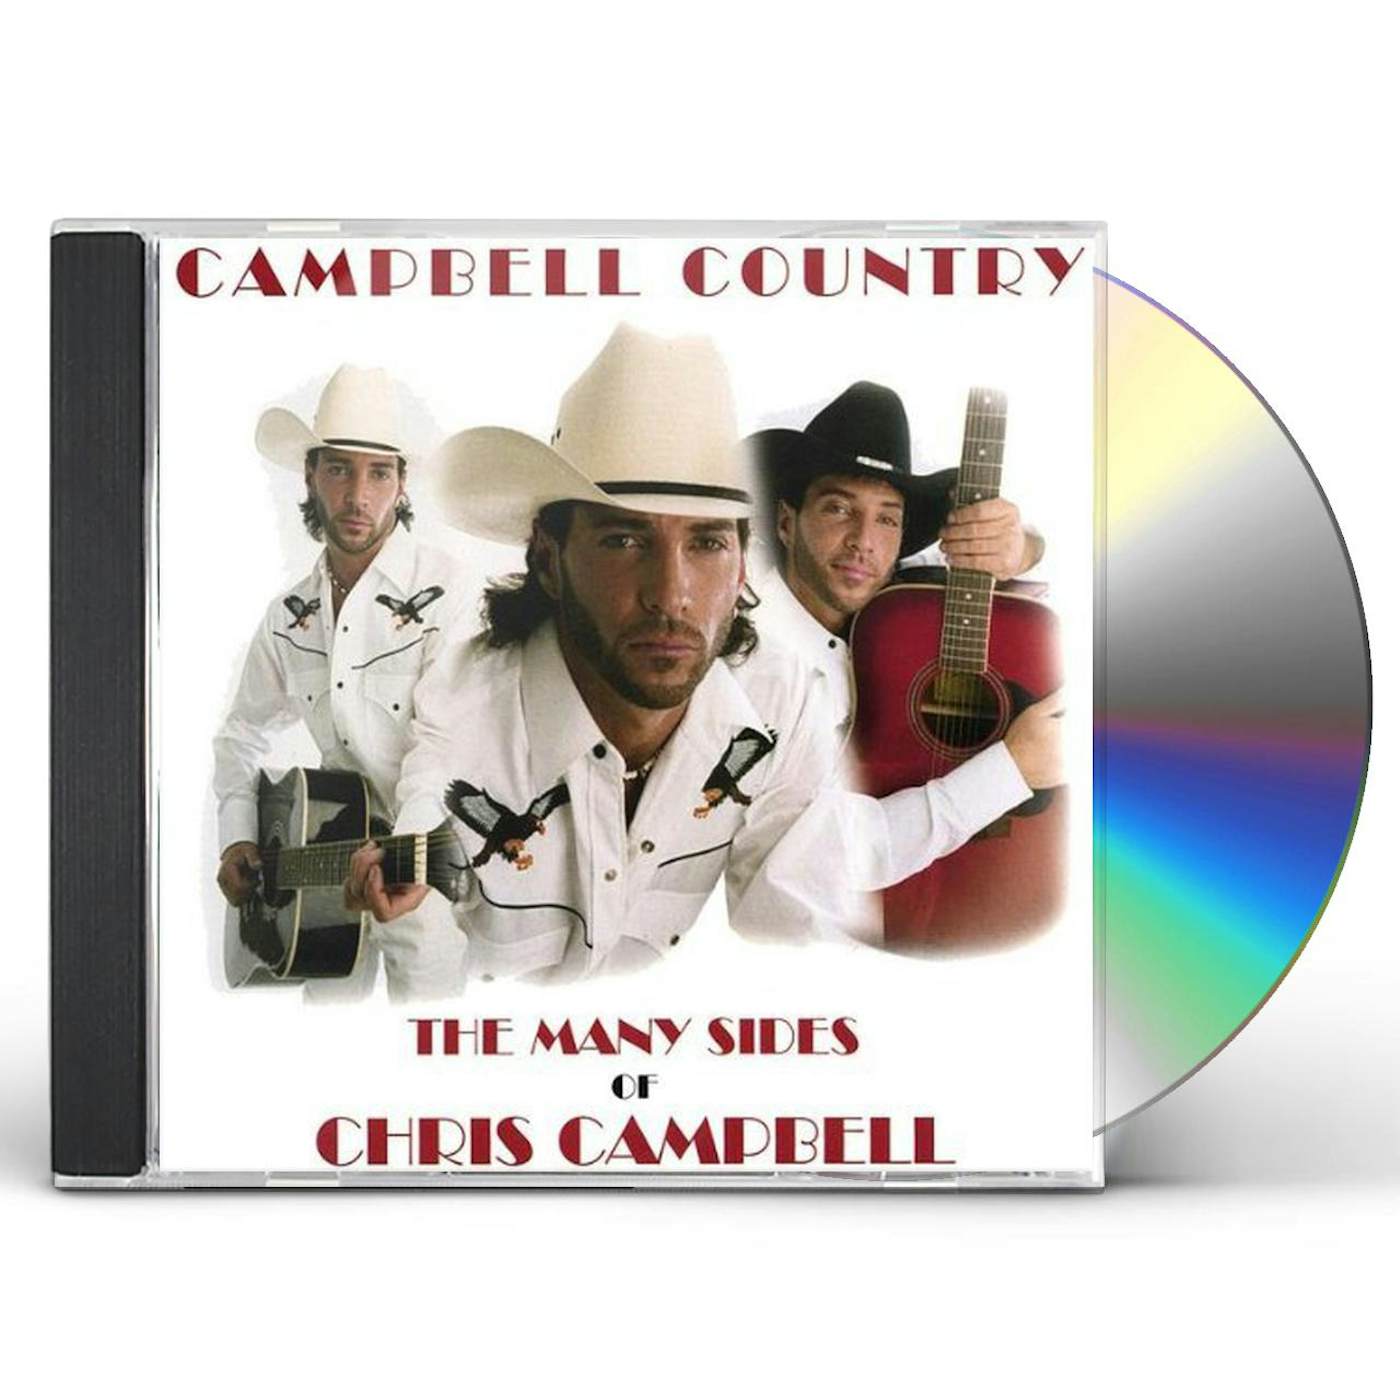 Chris Campbell CAMPBELL COUNTRY CD